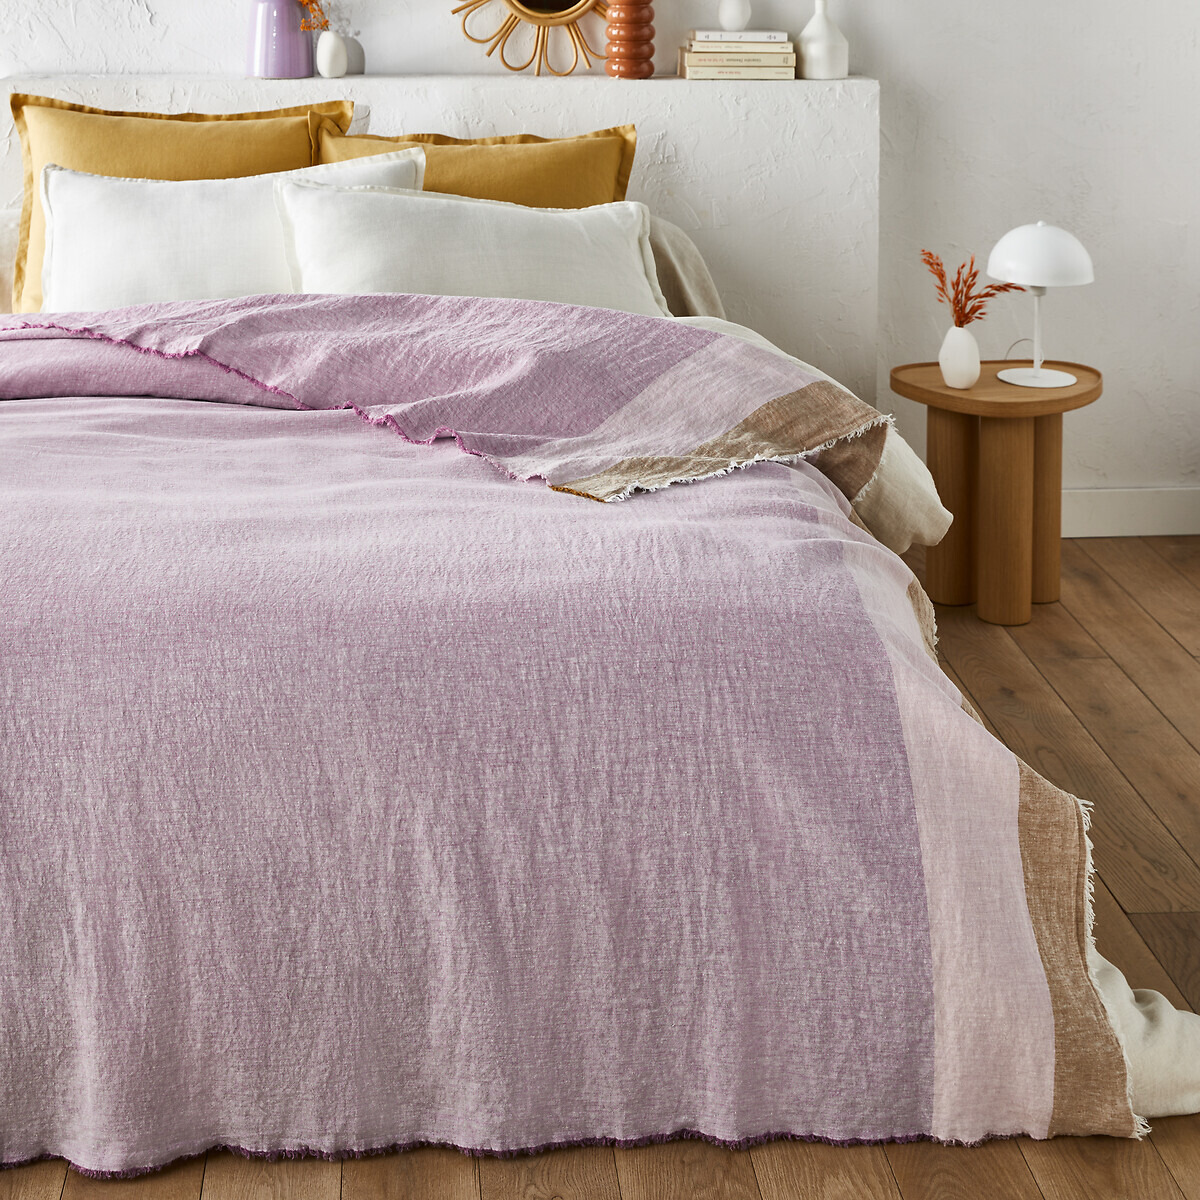 Valparaiso Woven-Dyed 100% Washed Linen Bedspread - image 1